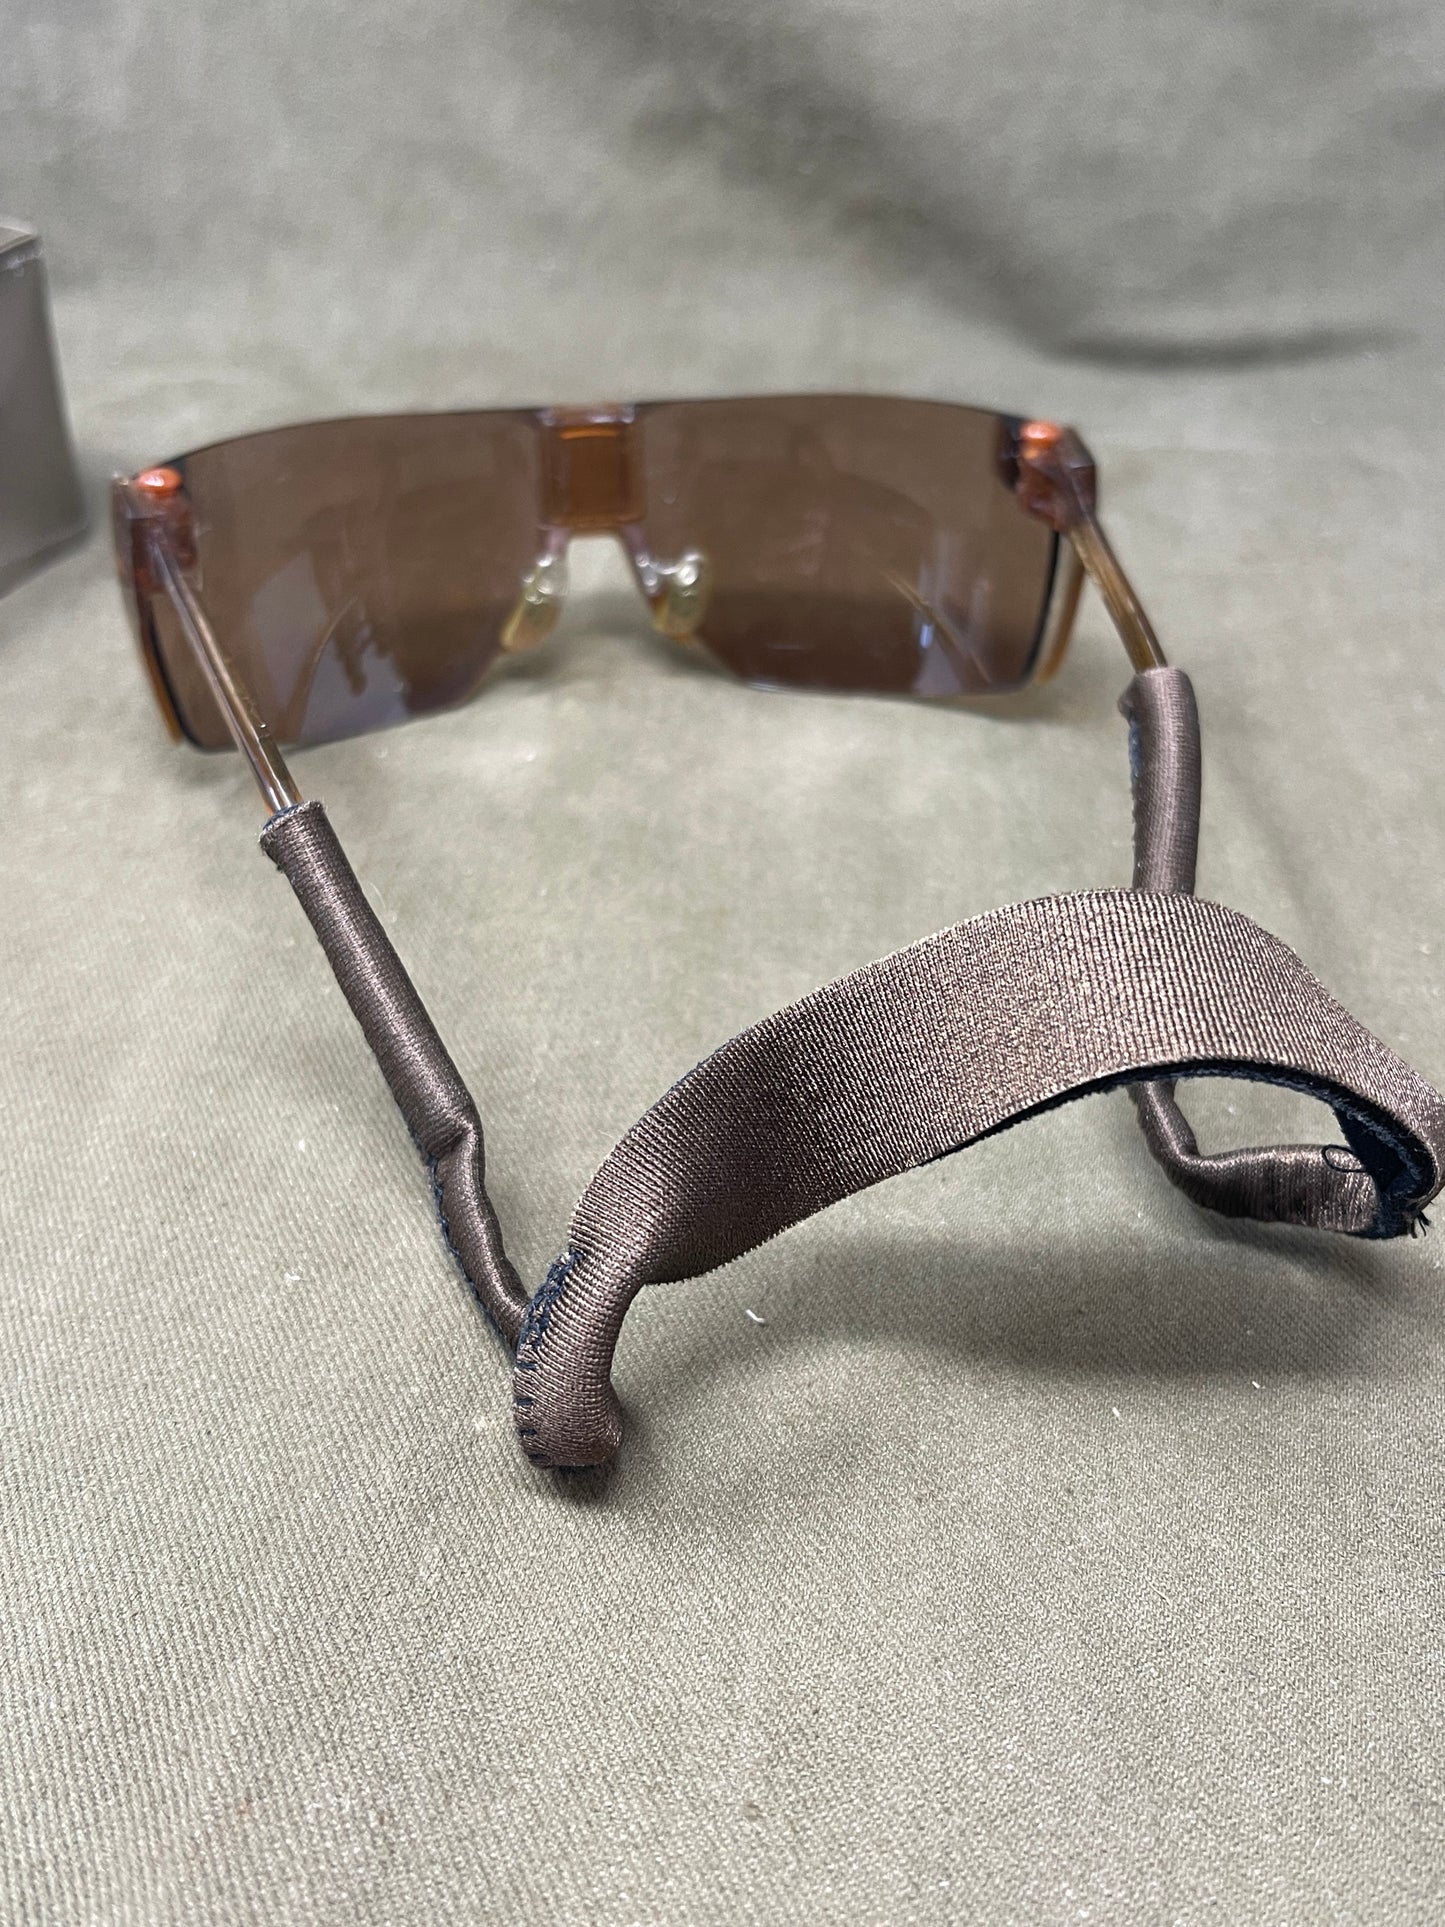 BLPS, Ballistic Laser Protective Spectacles